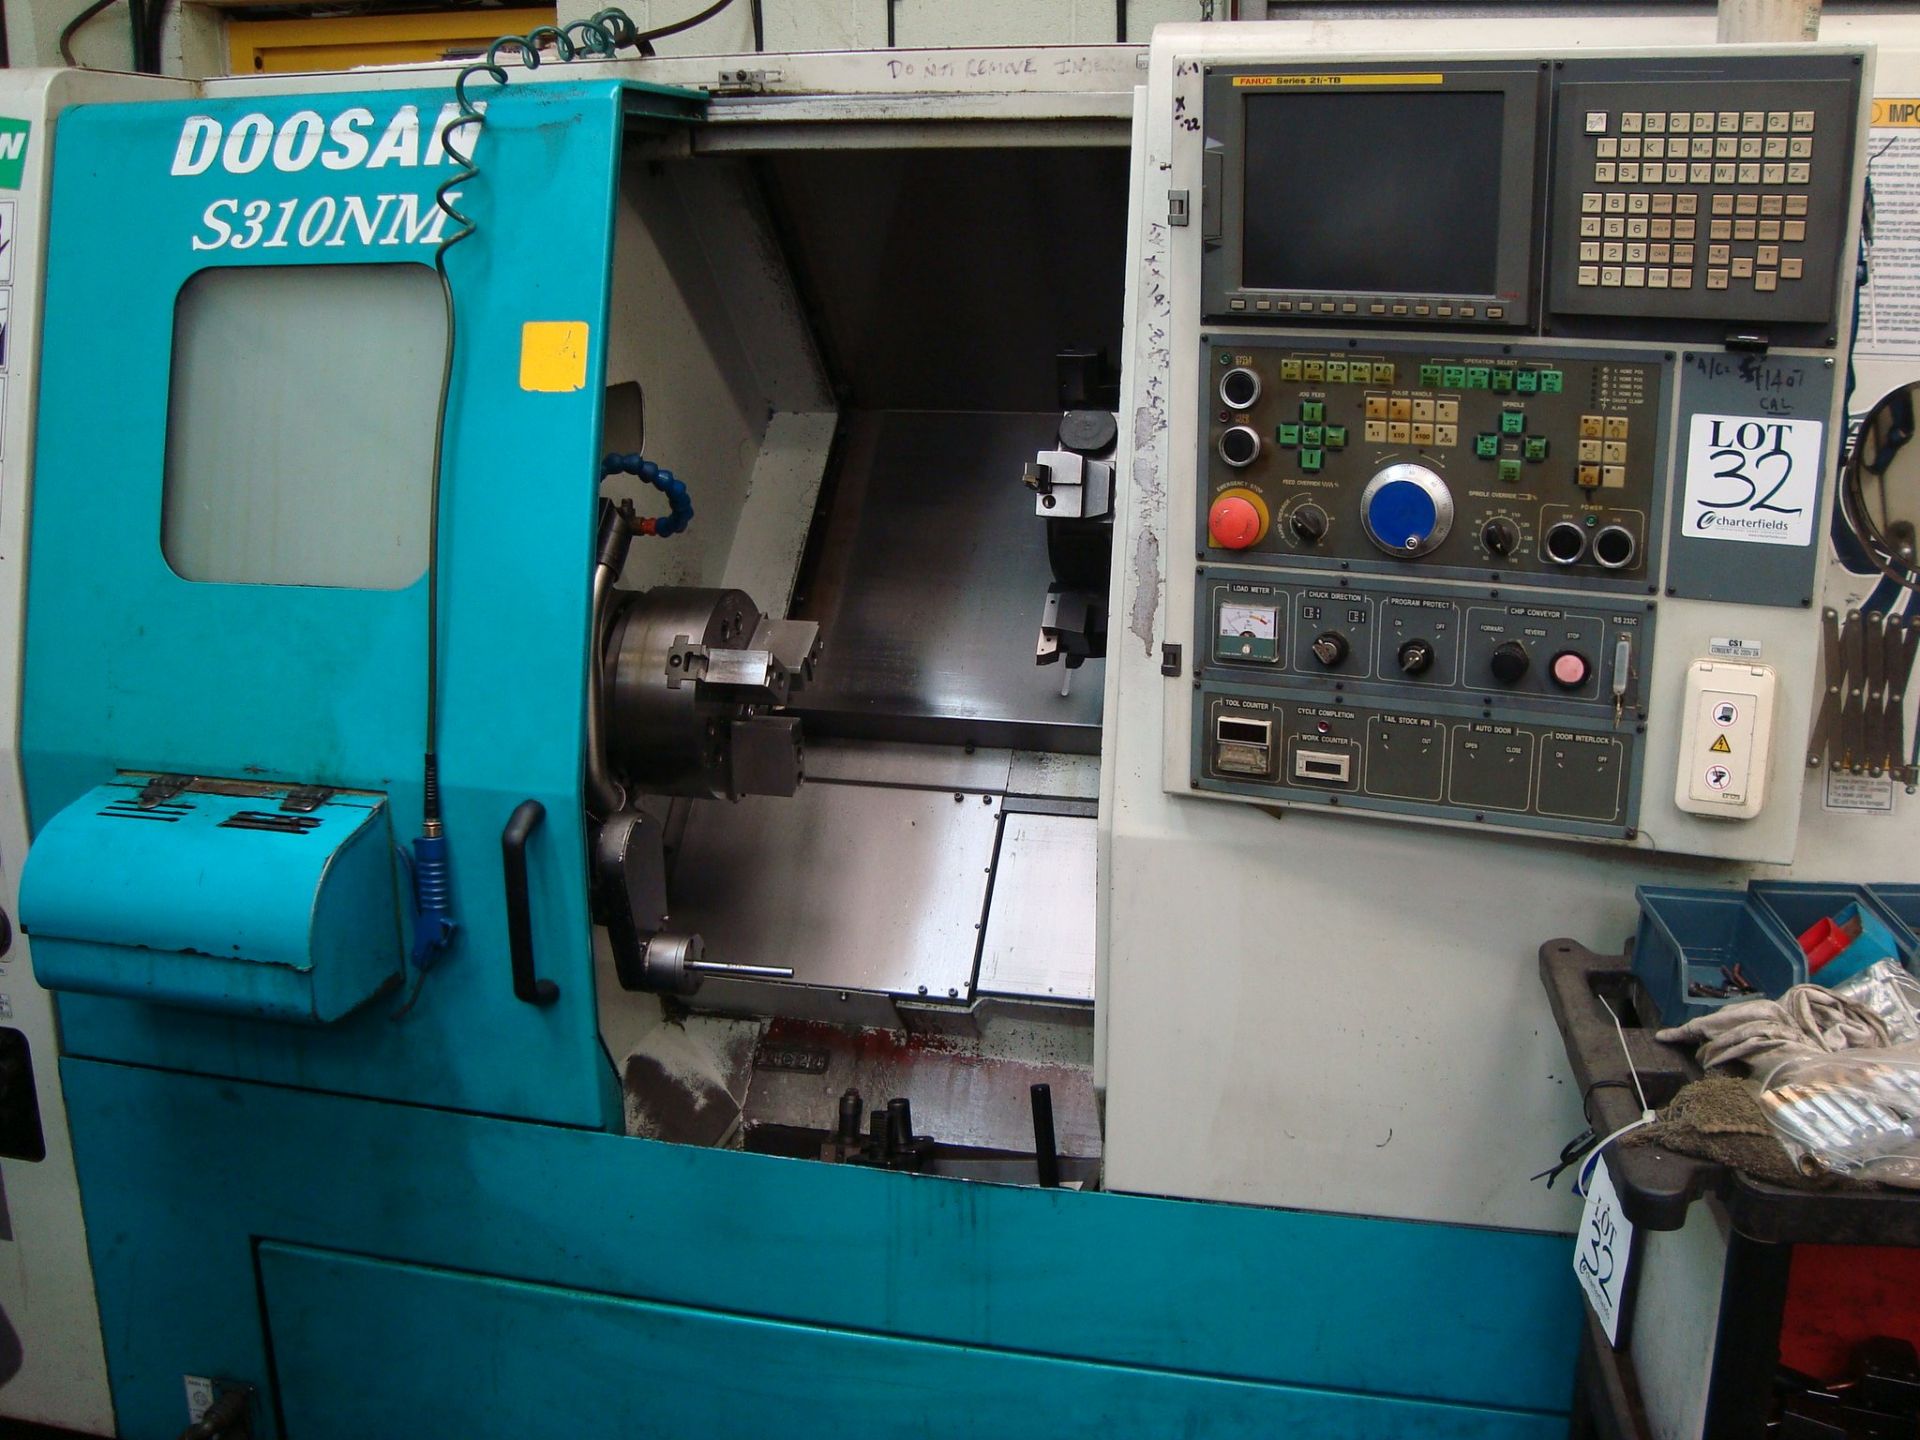 A Doosan S310NM CNC turning centre Serial number LSC1005 with Fanuc Series 21i-TB control, swarf